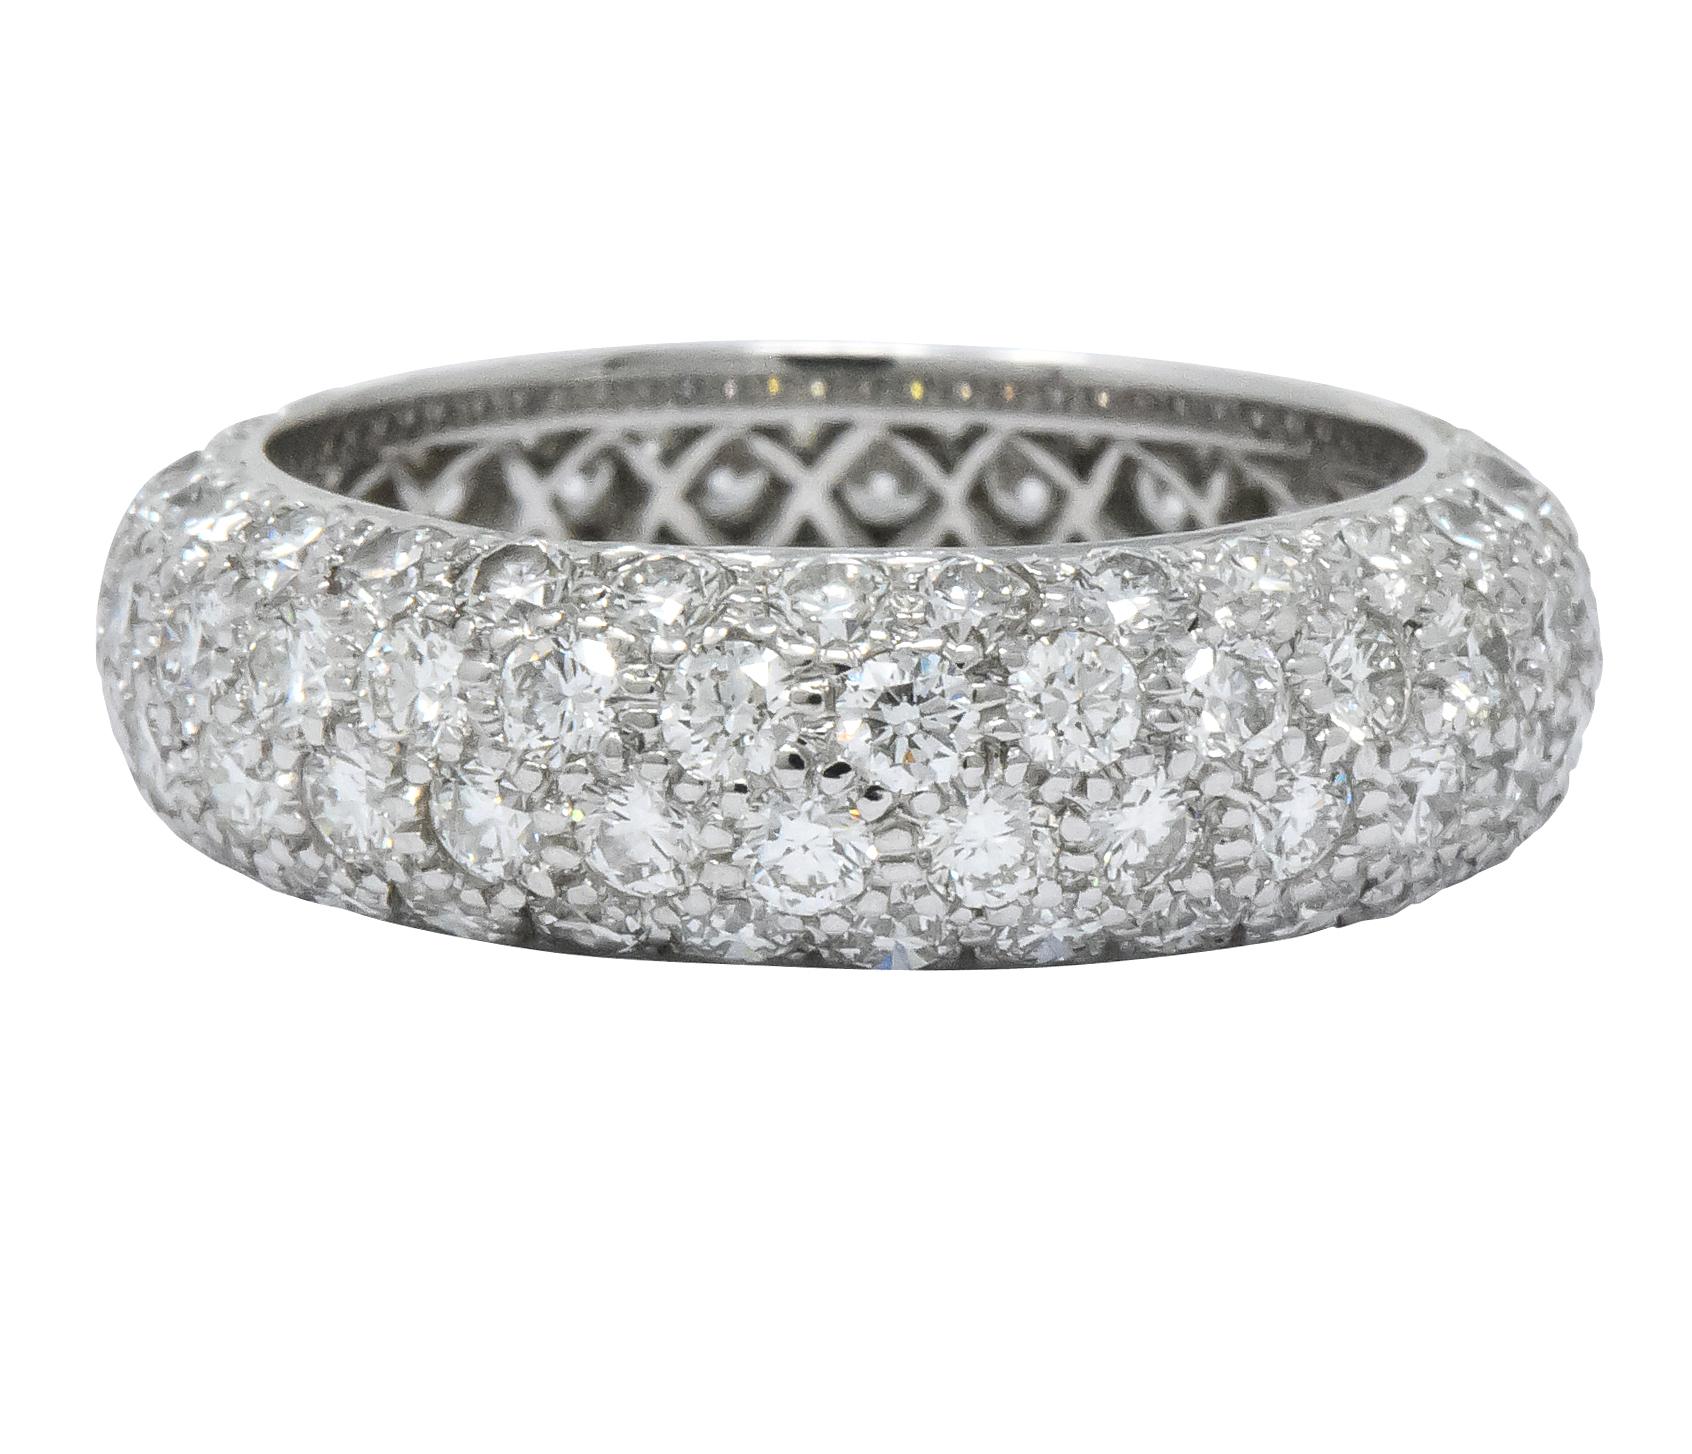 Domed band with pavé set round brilliant cut diamonds

Total diamond weight approximately 3.00 carats, G/H color and VS clarity

Fully signed Tiffany & Co. and stamped Pt 950 for platinum

Ring Size: 5 1/2 & Not Sizable

Top measures 6.0 mm and sits